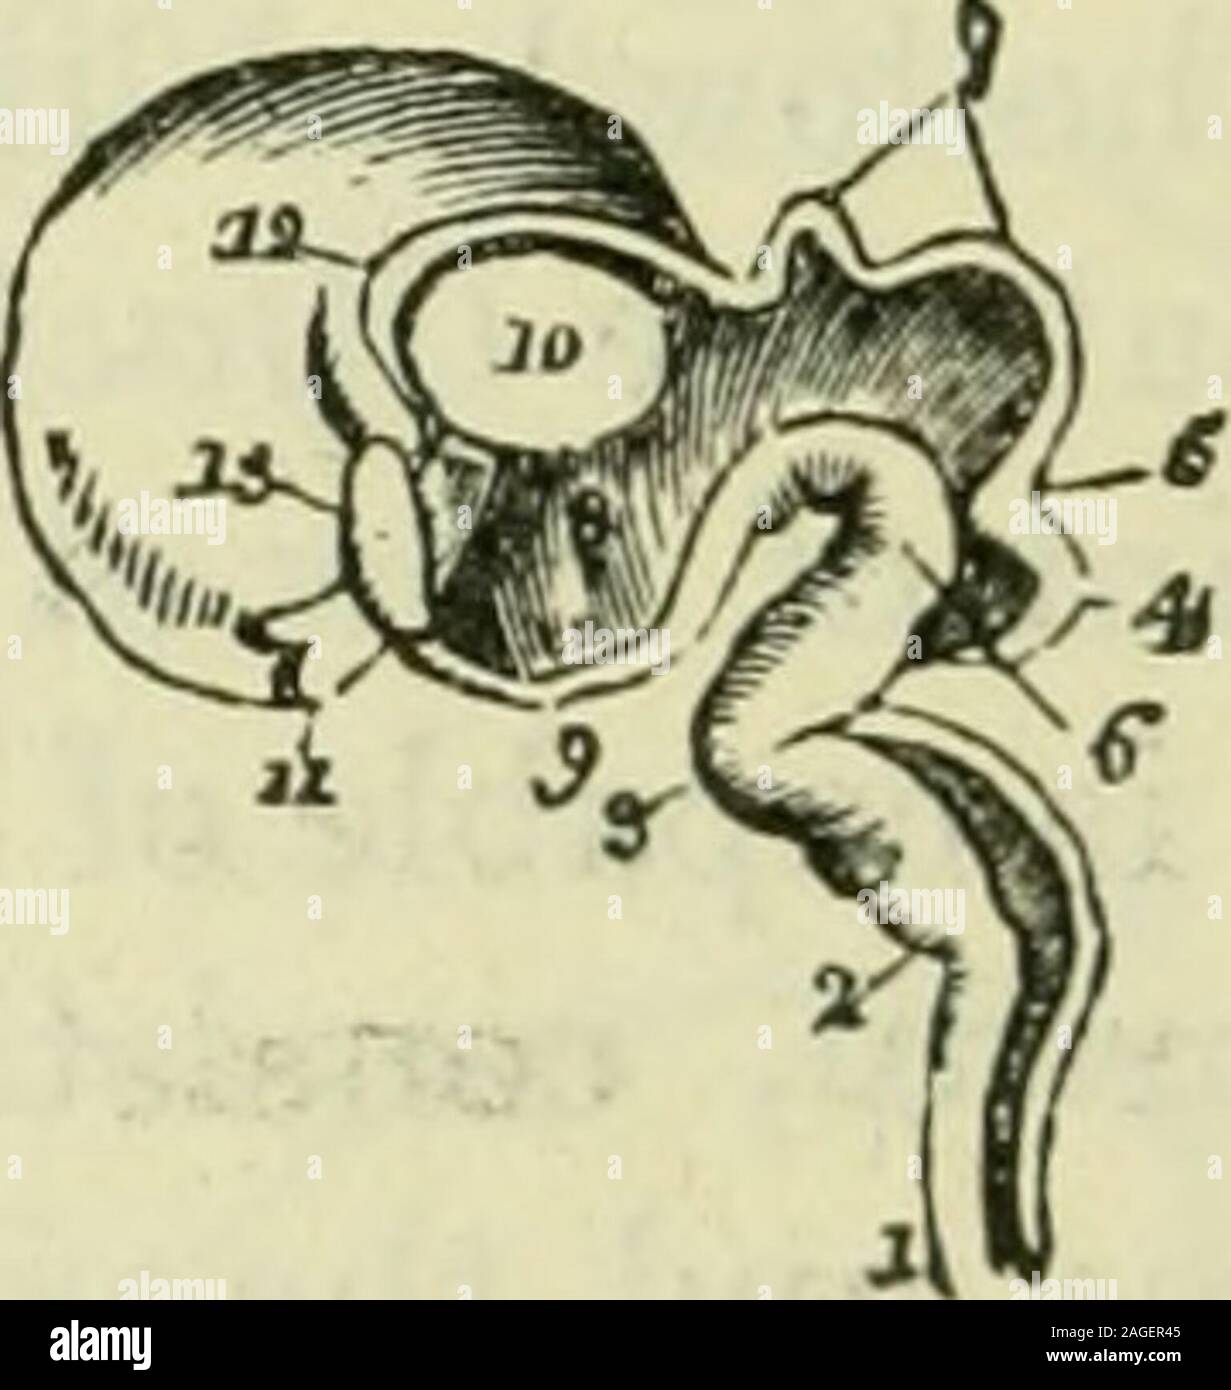 . The brain as an organ of mind. Pig. 123.—Sketches of the early form of the parts of the Cerebro-spinal Axis inthe Human Embryo. (Sharpc-y, after Tiedemann.) A, at the seventh week, hitcral view; 1, spinal cord ; 2, medulla oblongata;8, cerebellum ; 4, mesencephalon ; 5, 6, 7, cerebrum. B, at the ninth week, posterior view. 1, medulla oblongata; 2, cerebellum;8, mesciijccphalon ; 4, 5, thalami optici and cerebral hemispheres. C and U, lateral and posterior views of the brain of the human embryo as itappears at the twelfth weeki.f intra-uterine life, a, cerebrum; b, corpora qiiadri-gemina ; c, Stock Photo